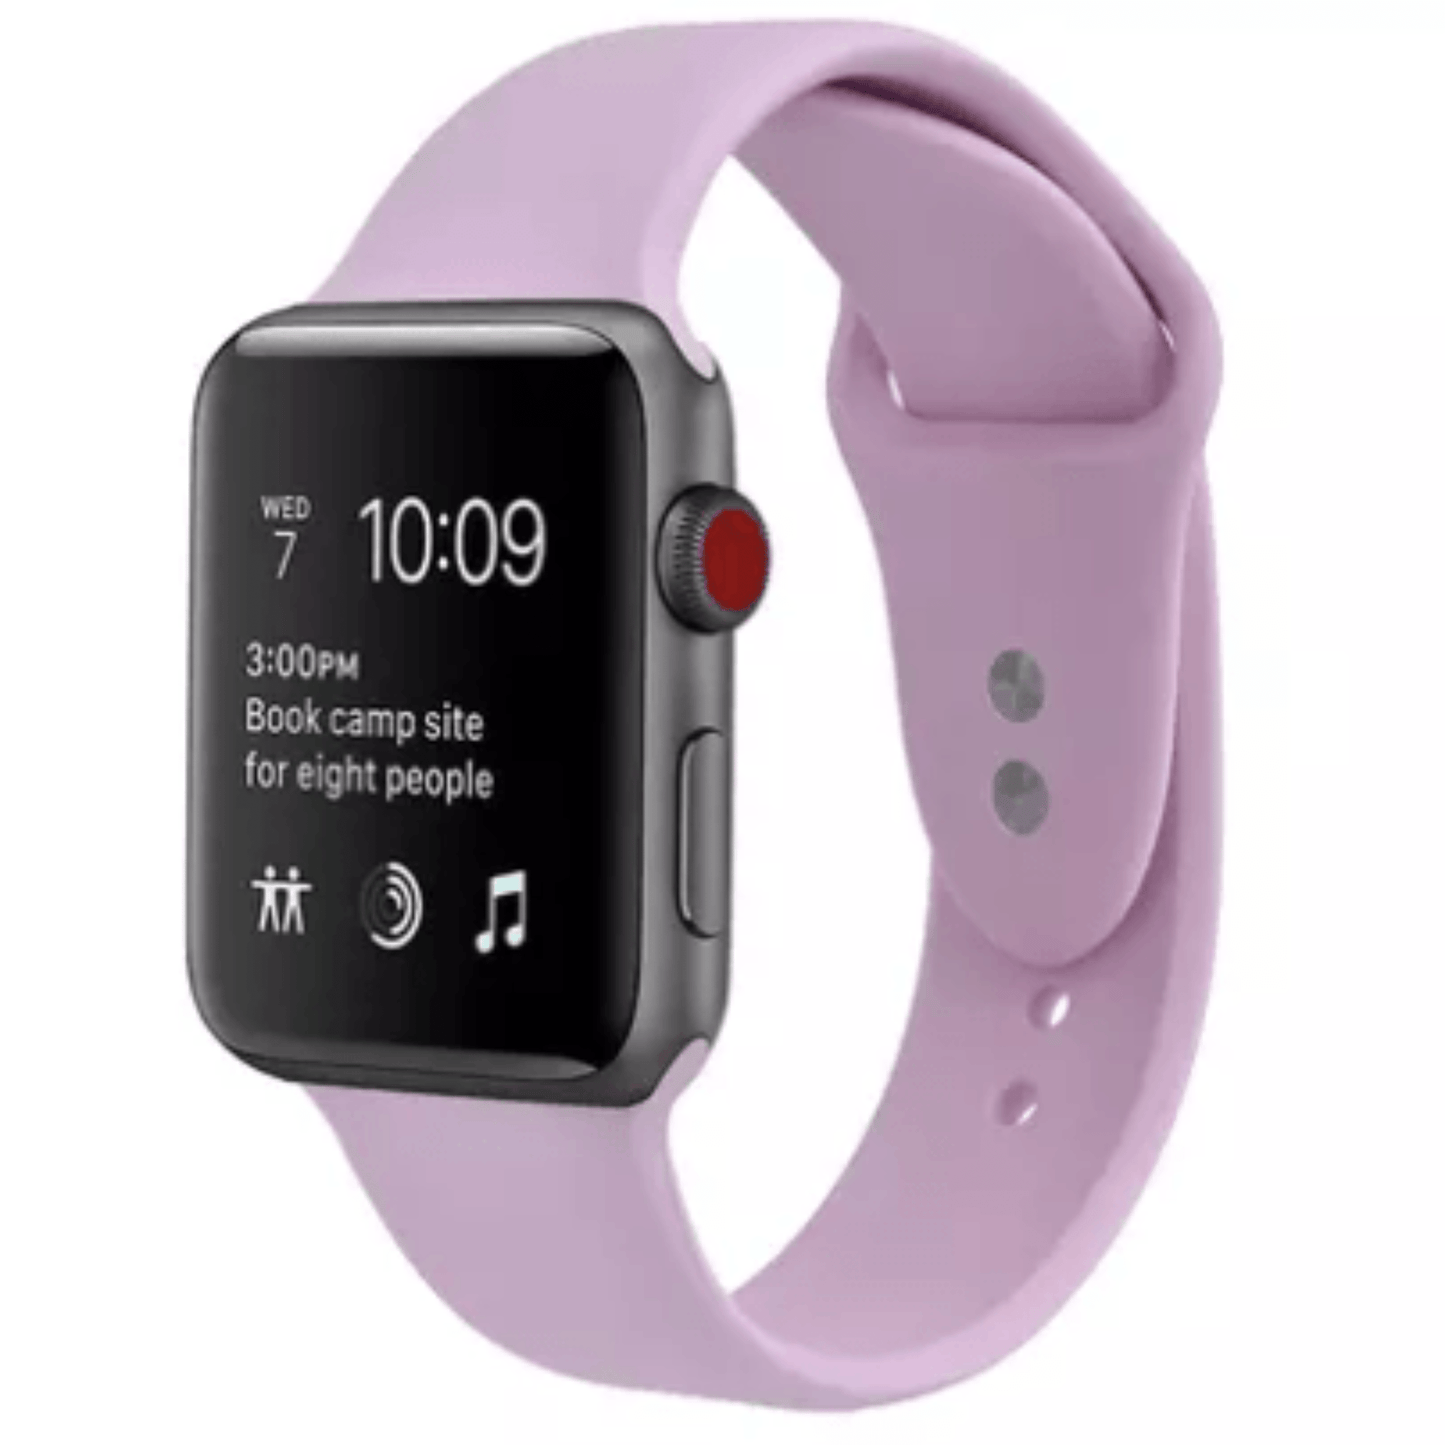 Silicone Sport Replacement Band for Apple Watch Lavender Apple Watch Band Elements Watches